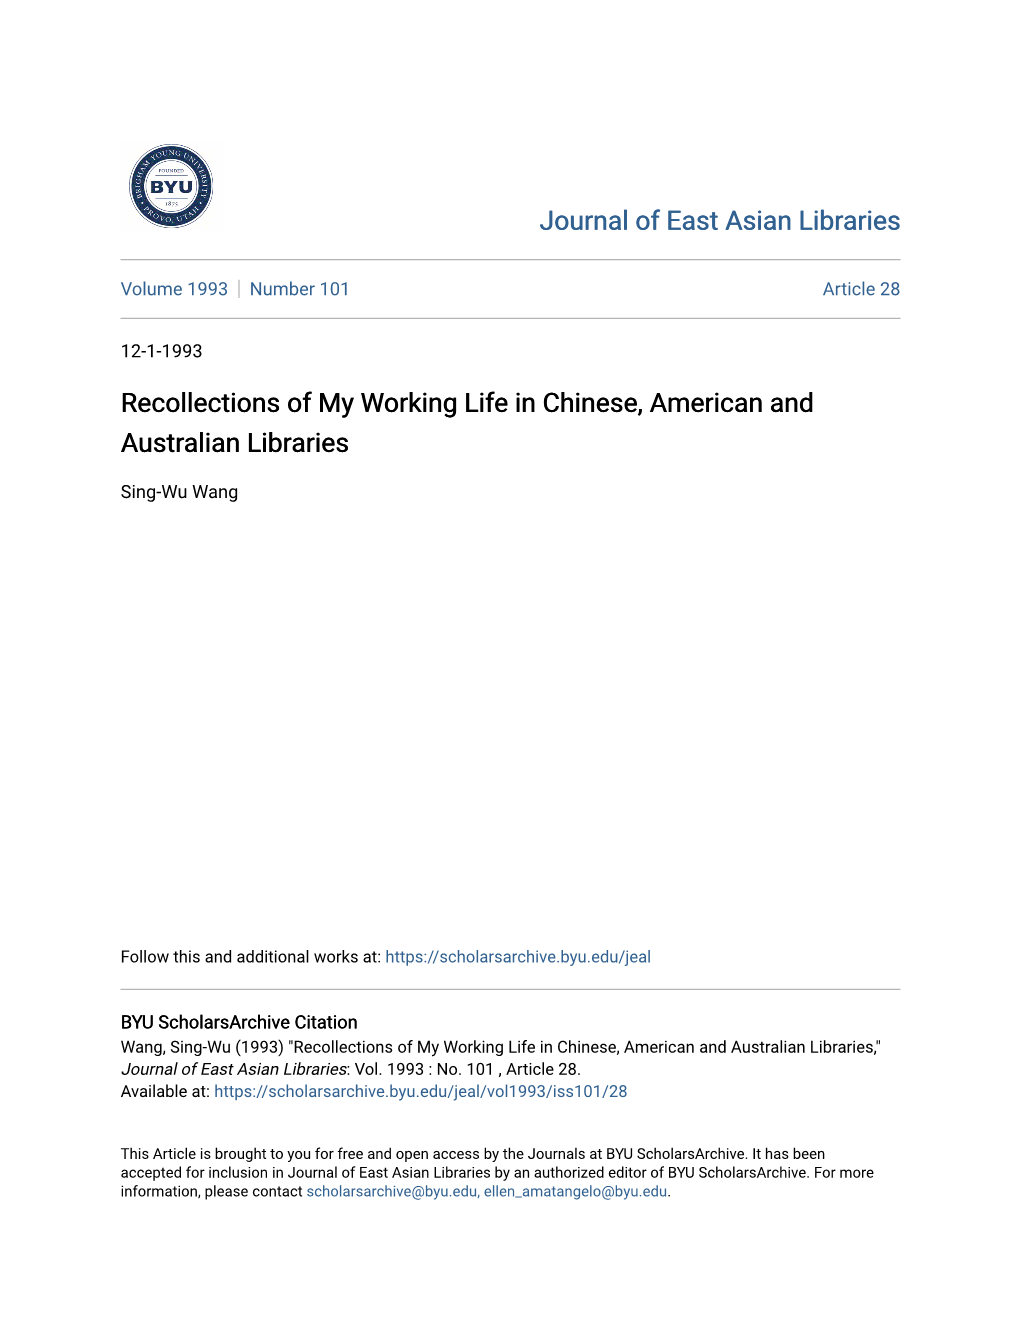 Recollections of My Working Life in Chinese, American and Australian Libraries